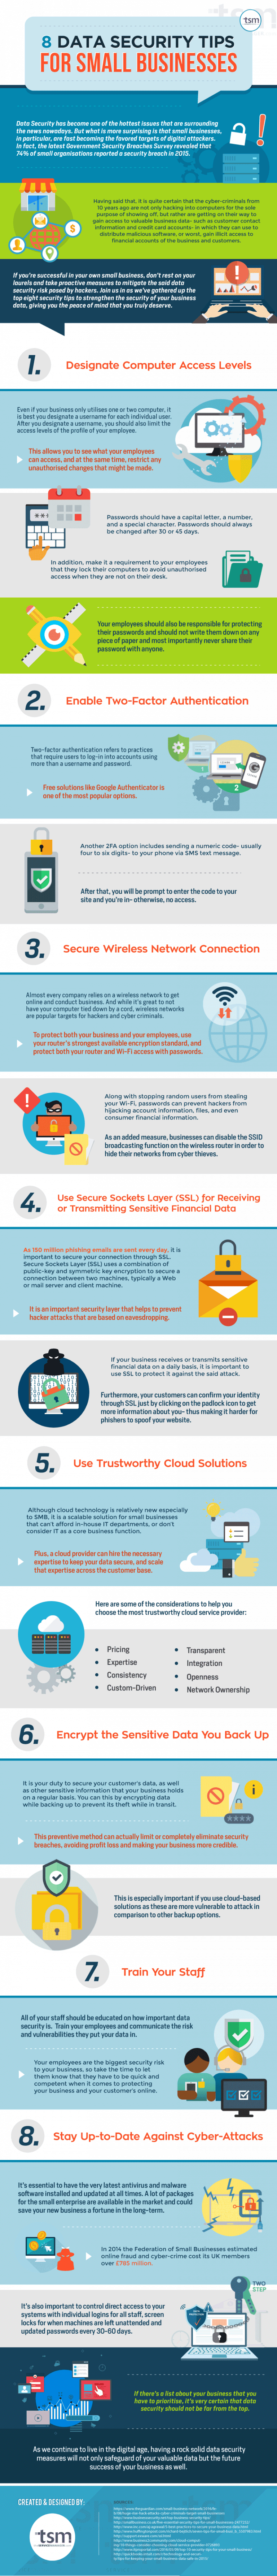 8-data-security-tips-for-small-businesses-hd